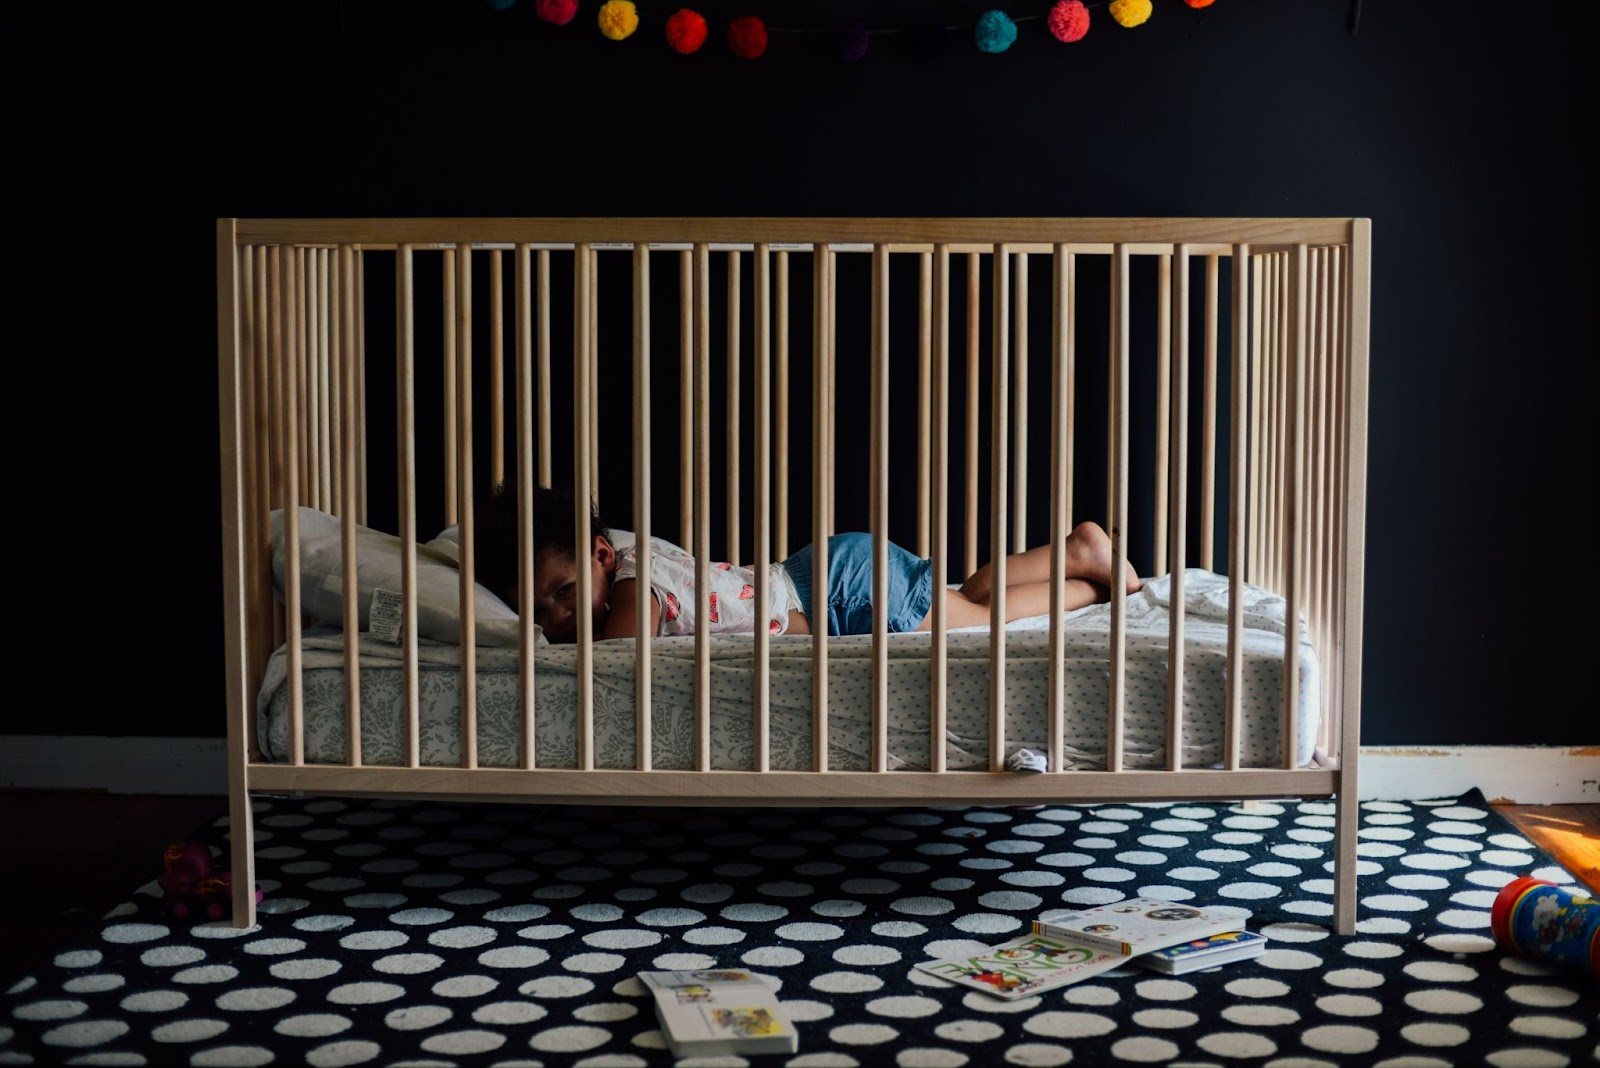 Toddler sleeping in a crib -Toddler bedroom ideas featured image - Baby Journey